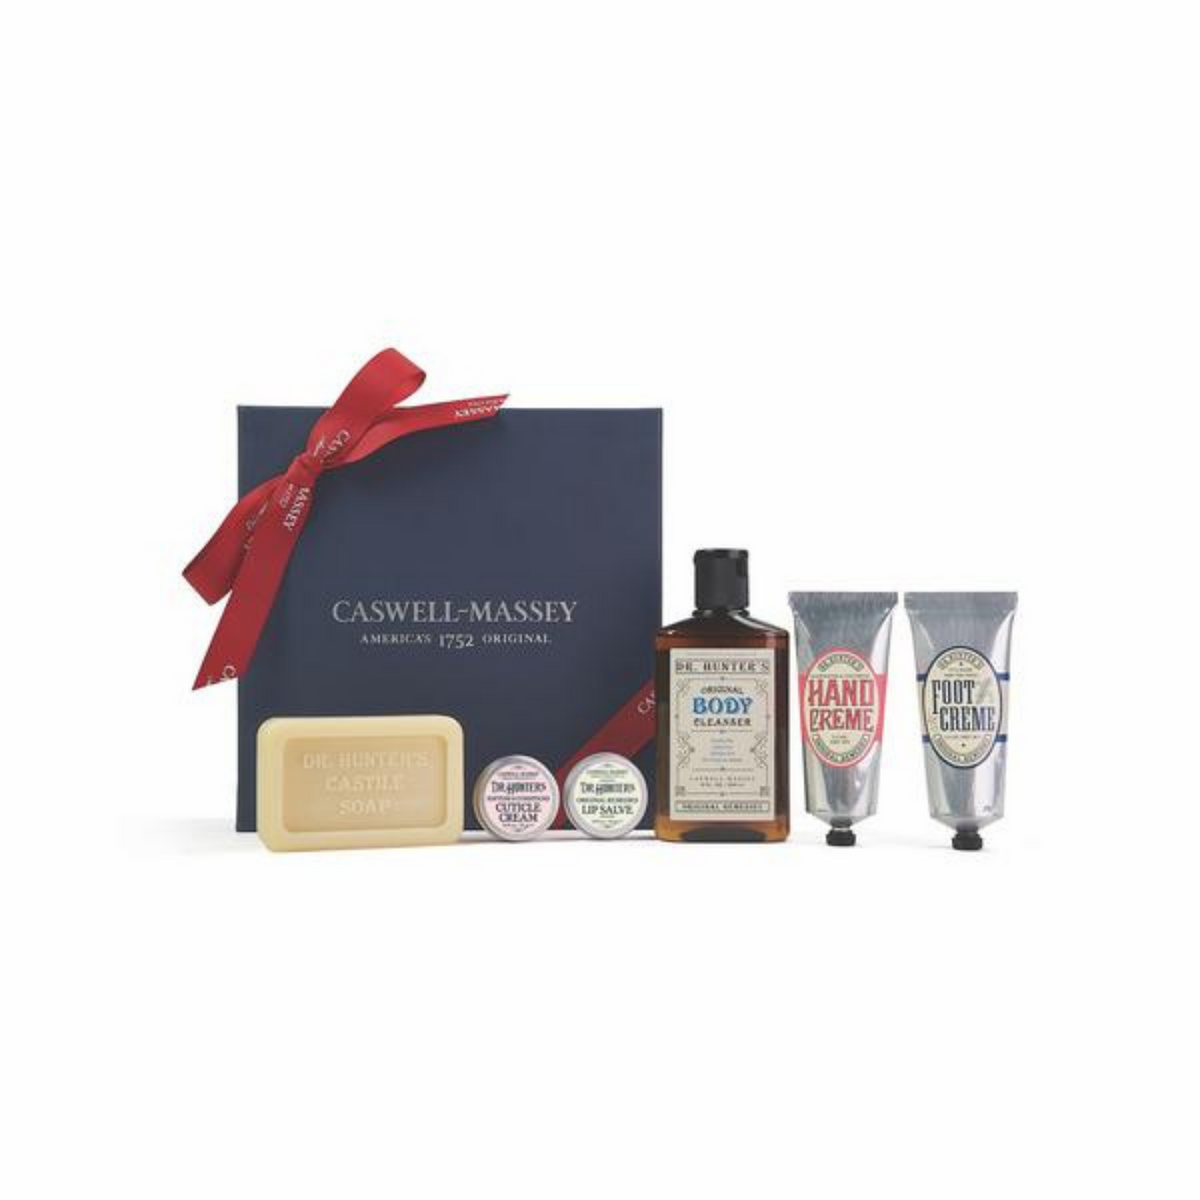 Primary image of Dr. Hunter's Original Remedies Apothecary Solutions Gift Set